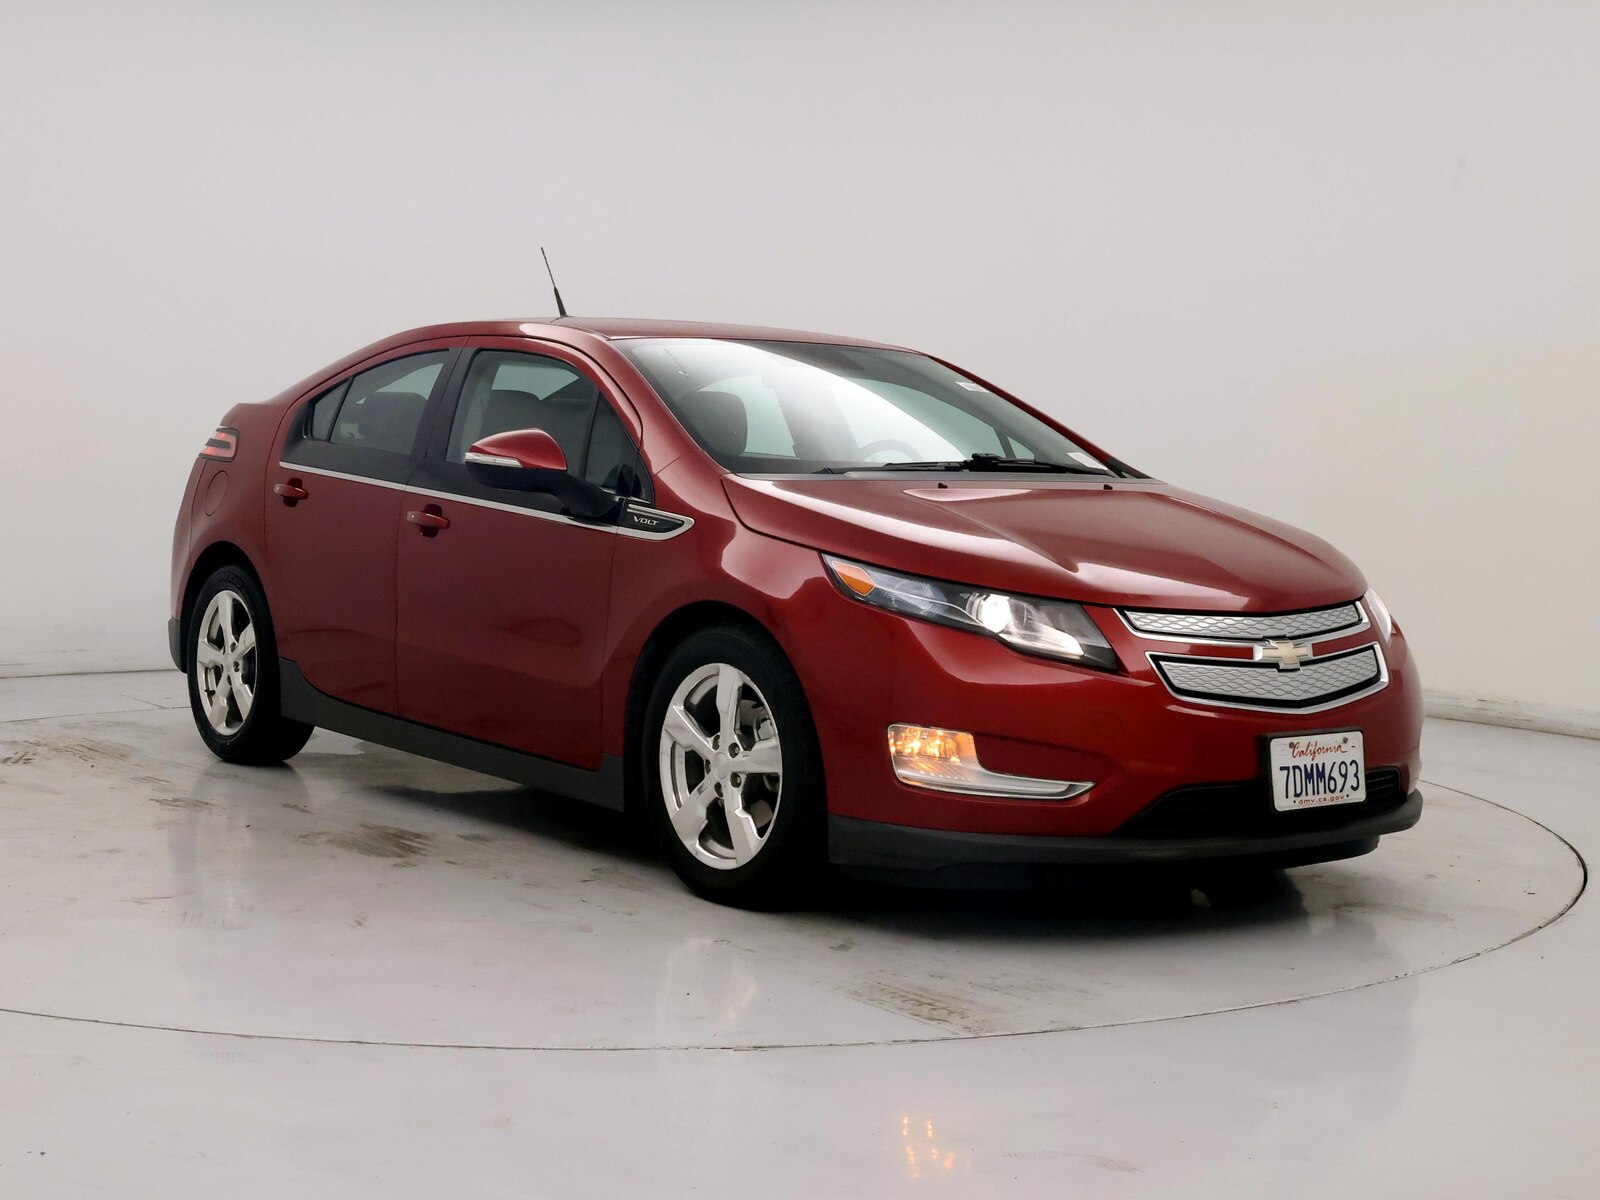 Used 2013 Chevrolet Volt  with VIN 1G1RD6E41DU134789 for sale in Spokane Valley, WA